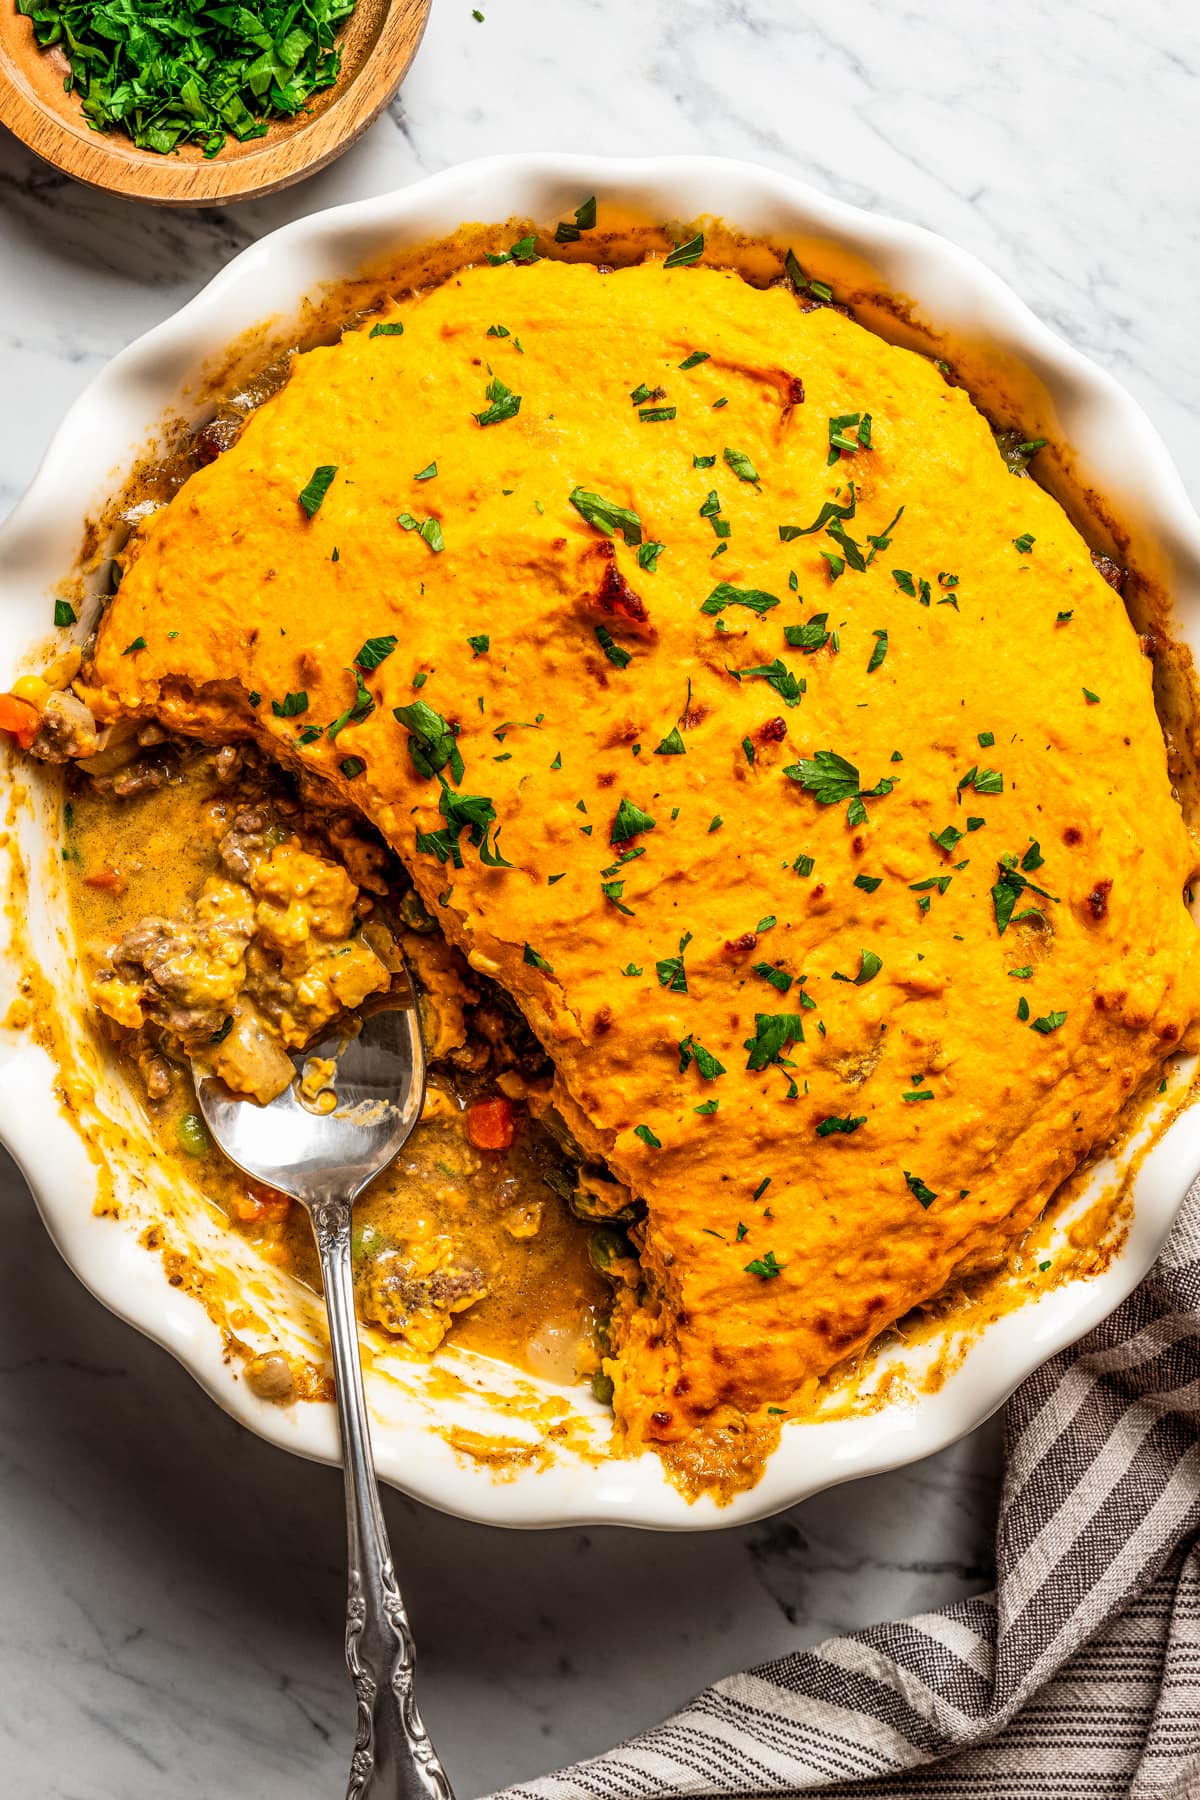 Overhead view of a baking dish with a sweet potato shepherd's pie and a spoon resting inside of the baking dish.